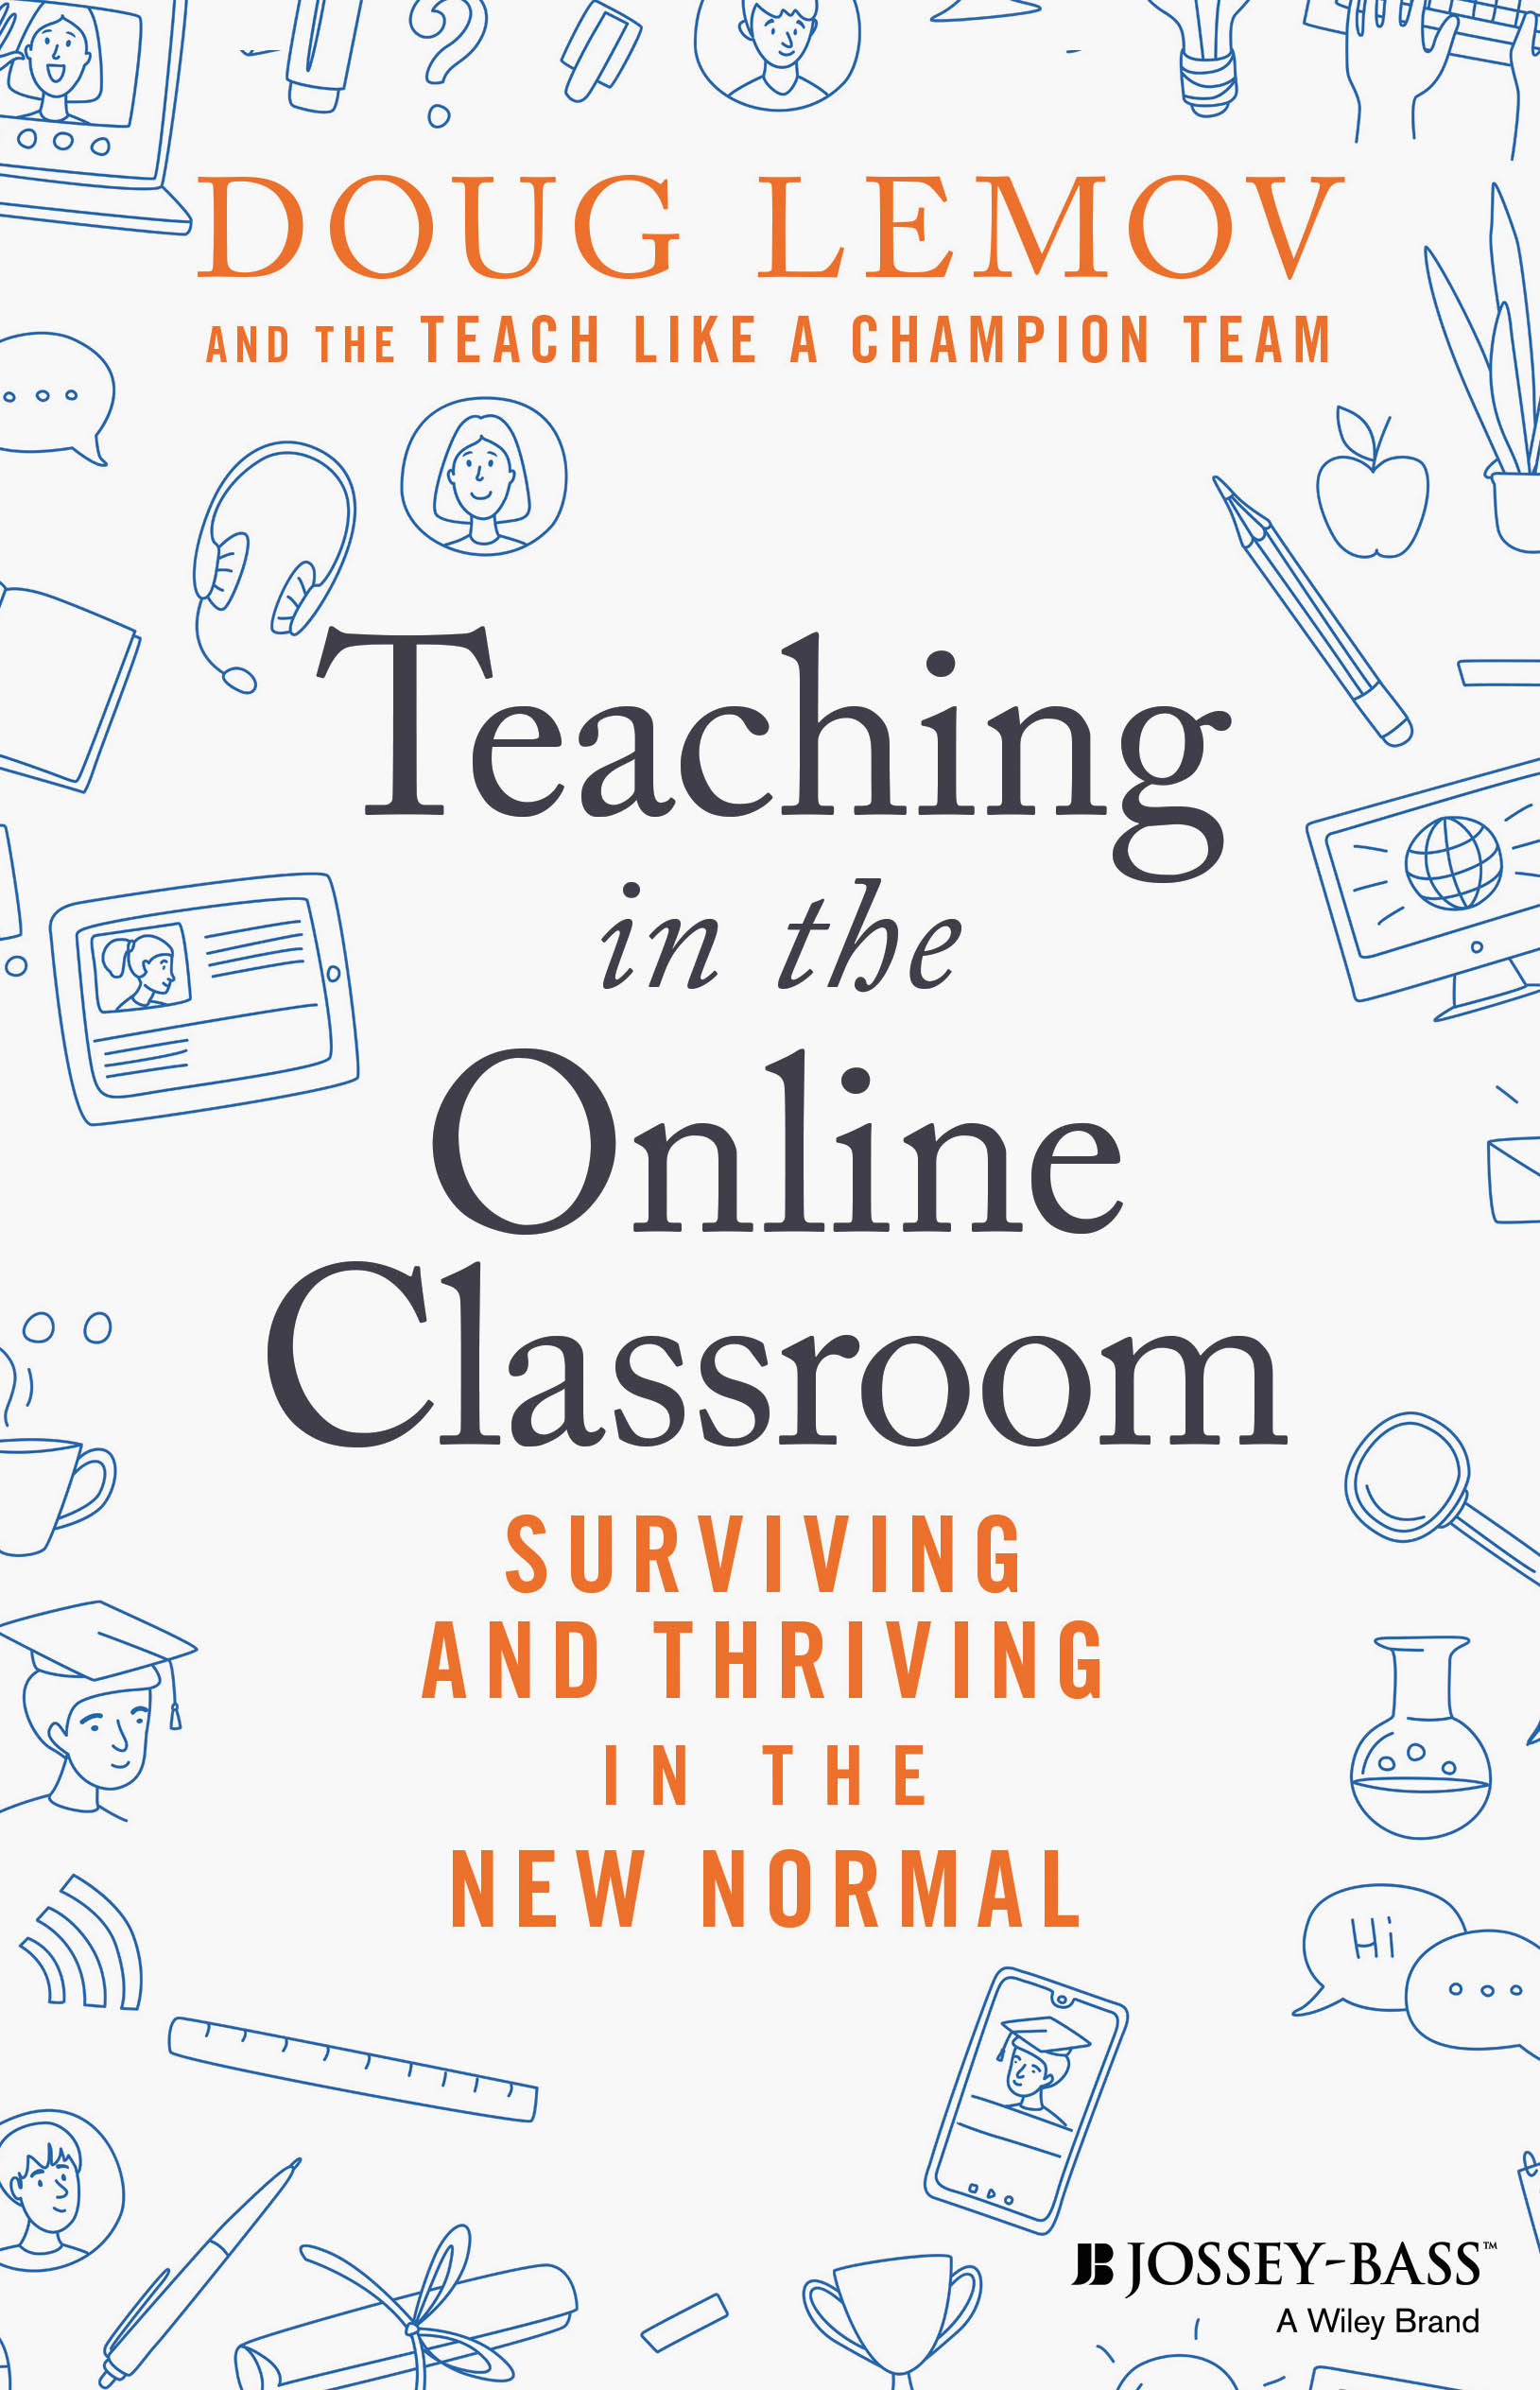 'Teaching in the Online Classroom' ebook cover.